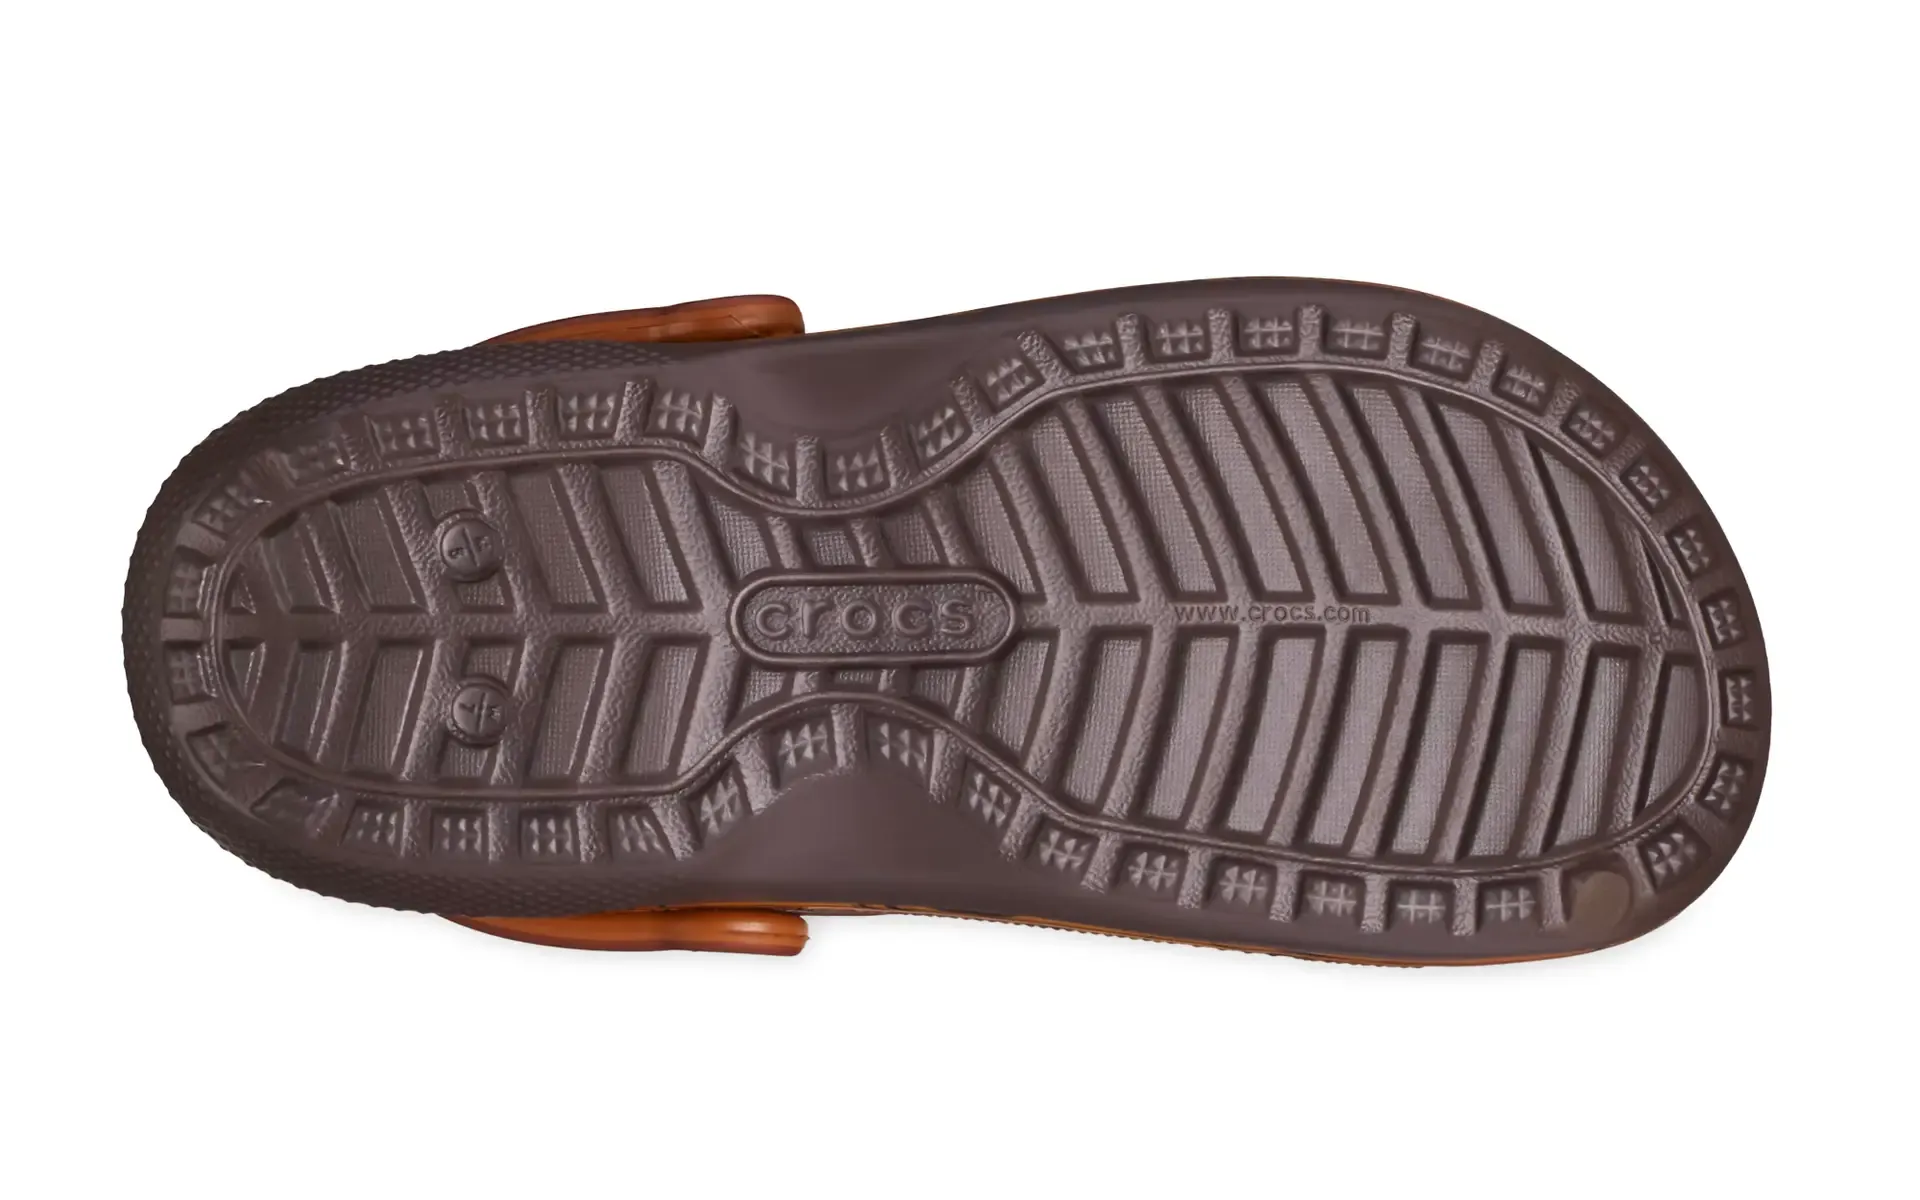 sitesupply.co Star Wars Crocs Classic Clog Chewbacca 208858-206 Release Info